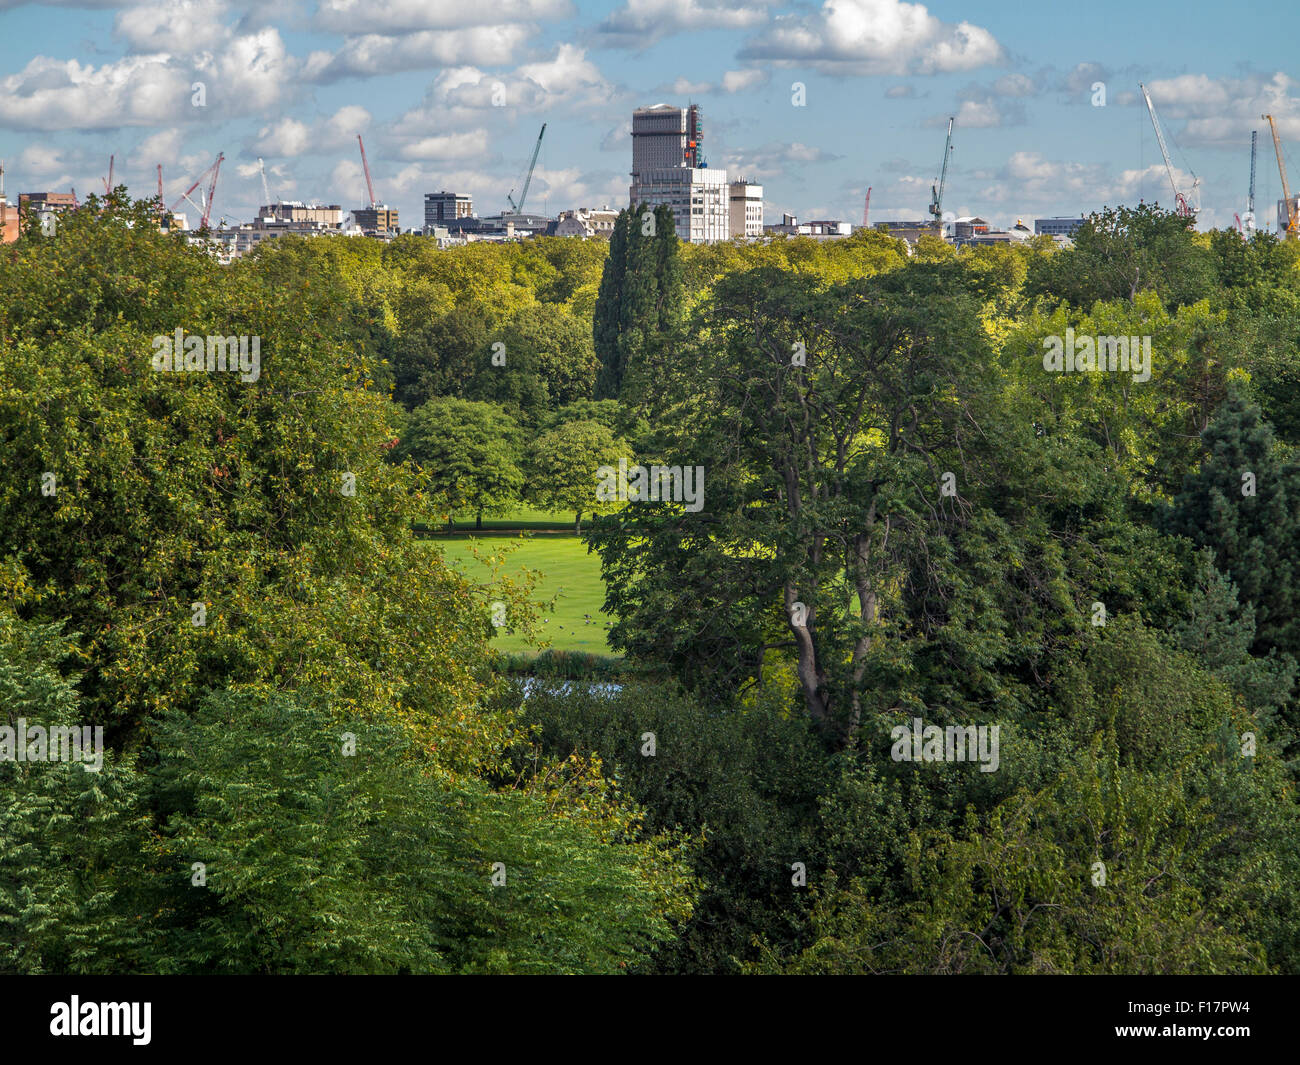 The gardens at Buckingham Palace seen from above Stock Photo